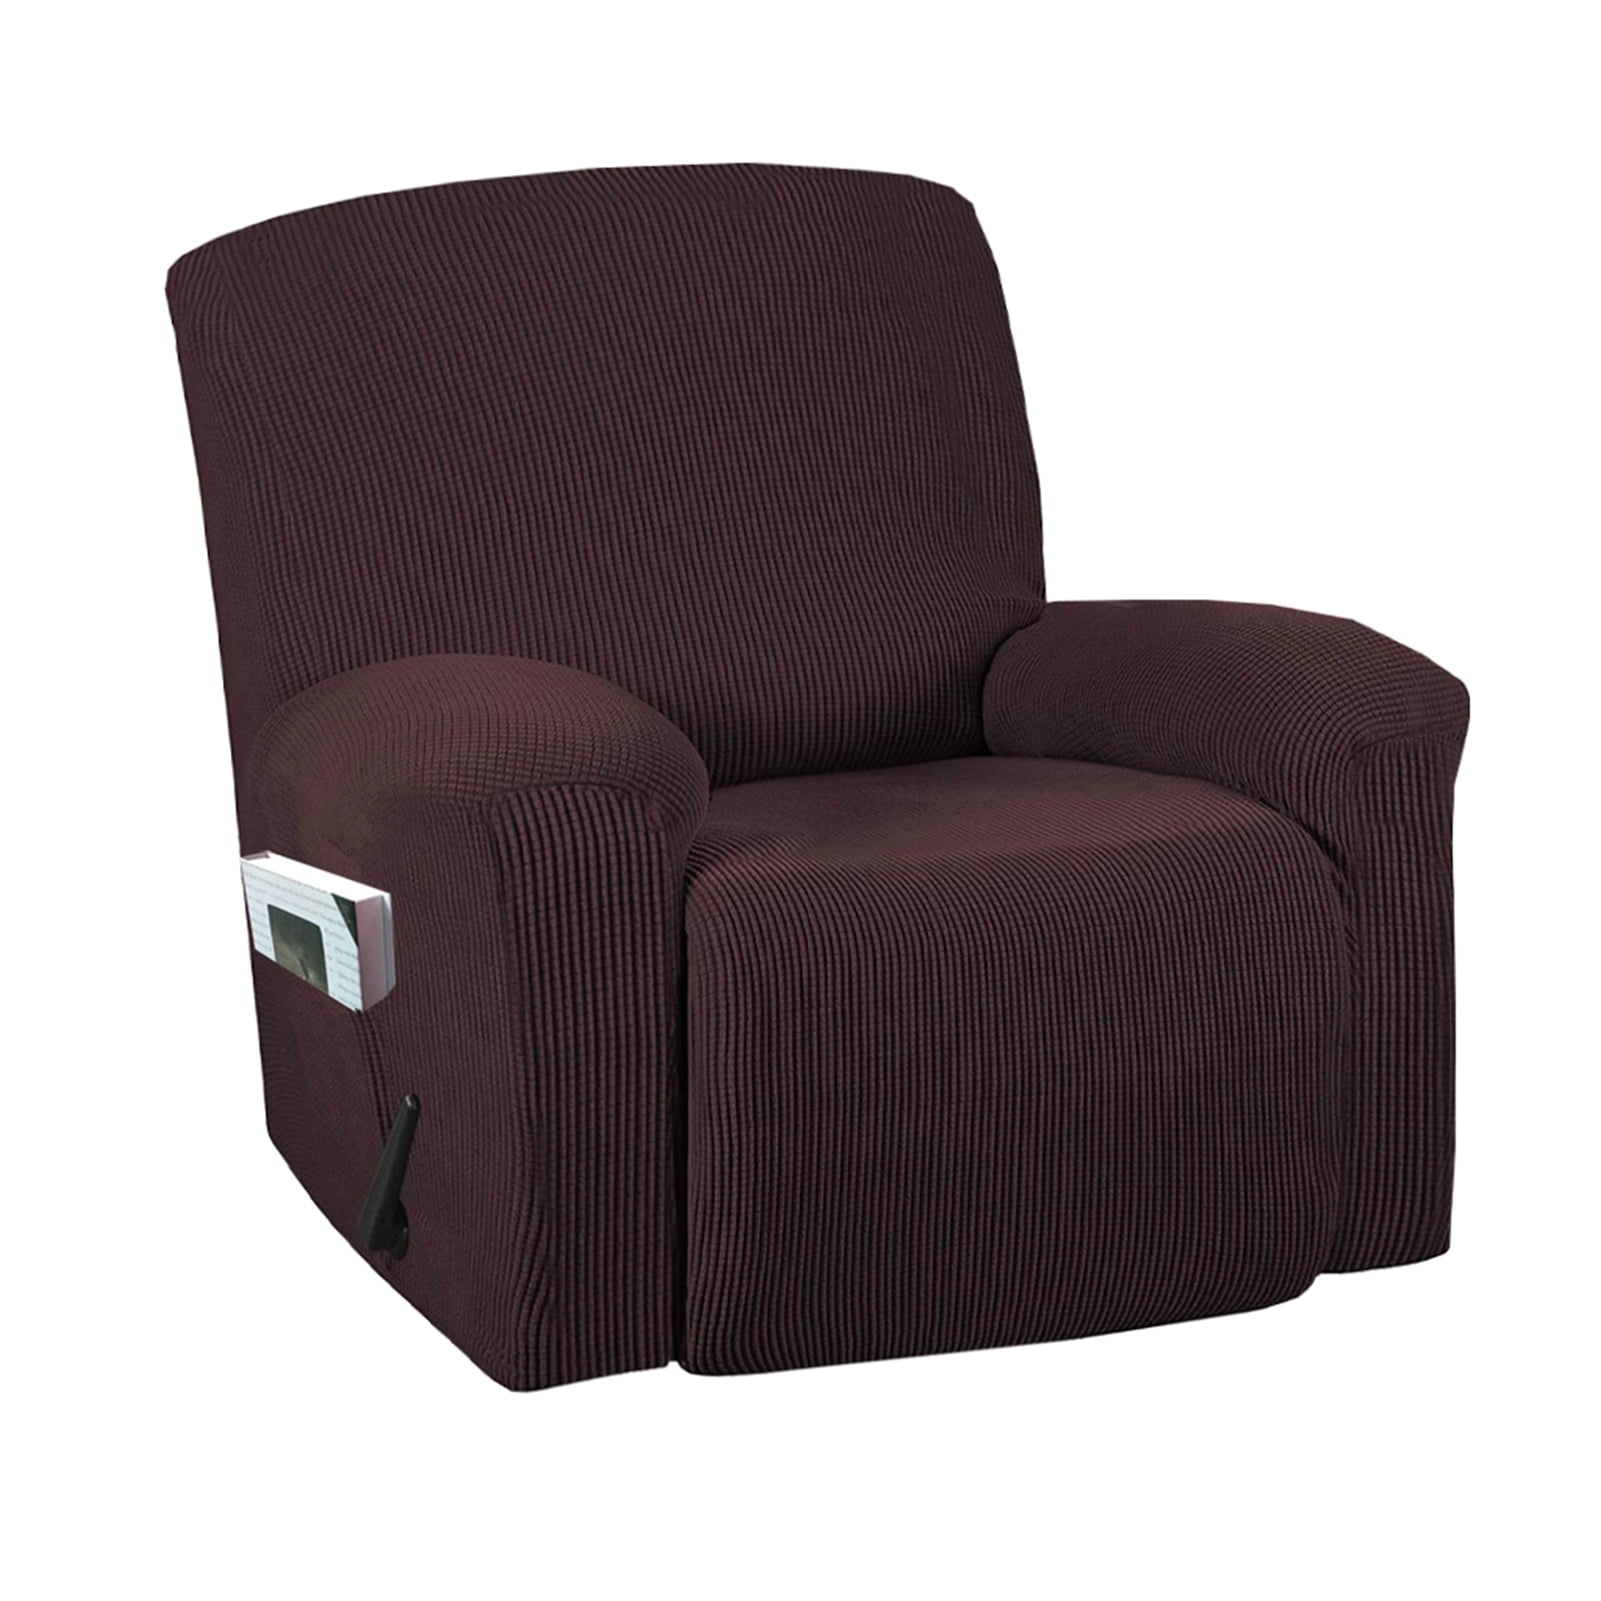 Details about   Slipcover Non Slip Easy Clean Recliner Chair Cover Home Decor For Living Room 